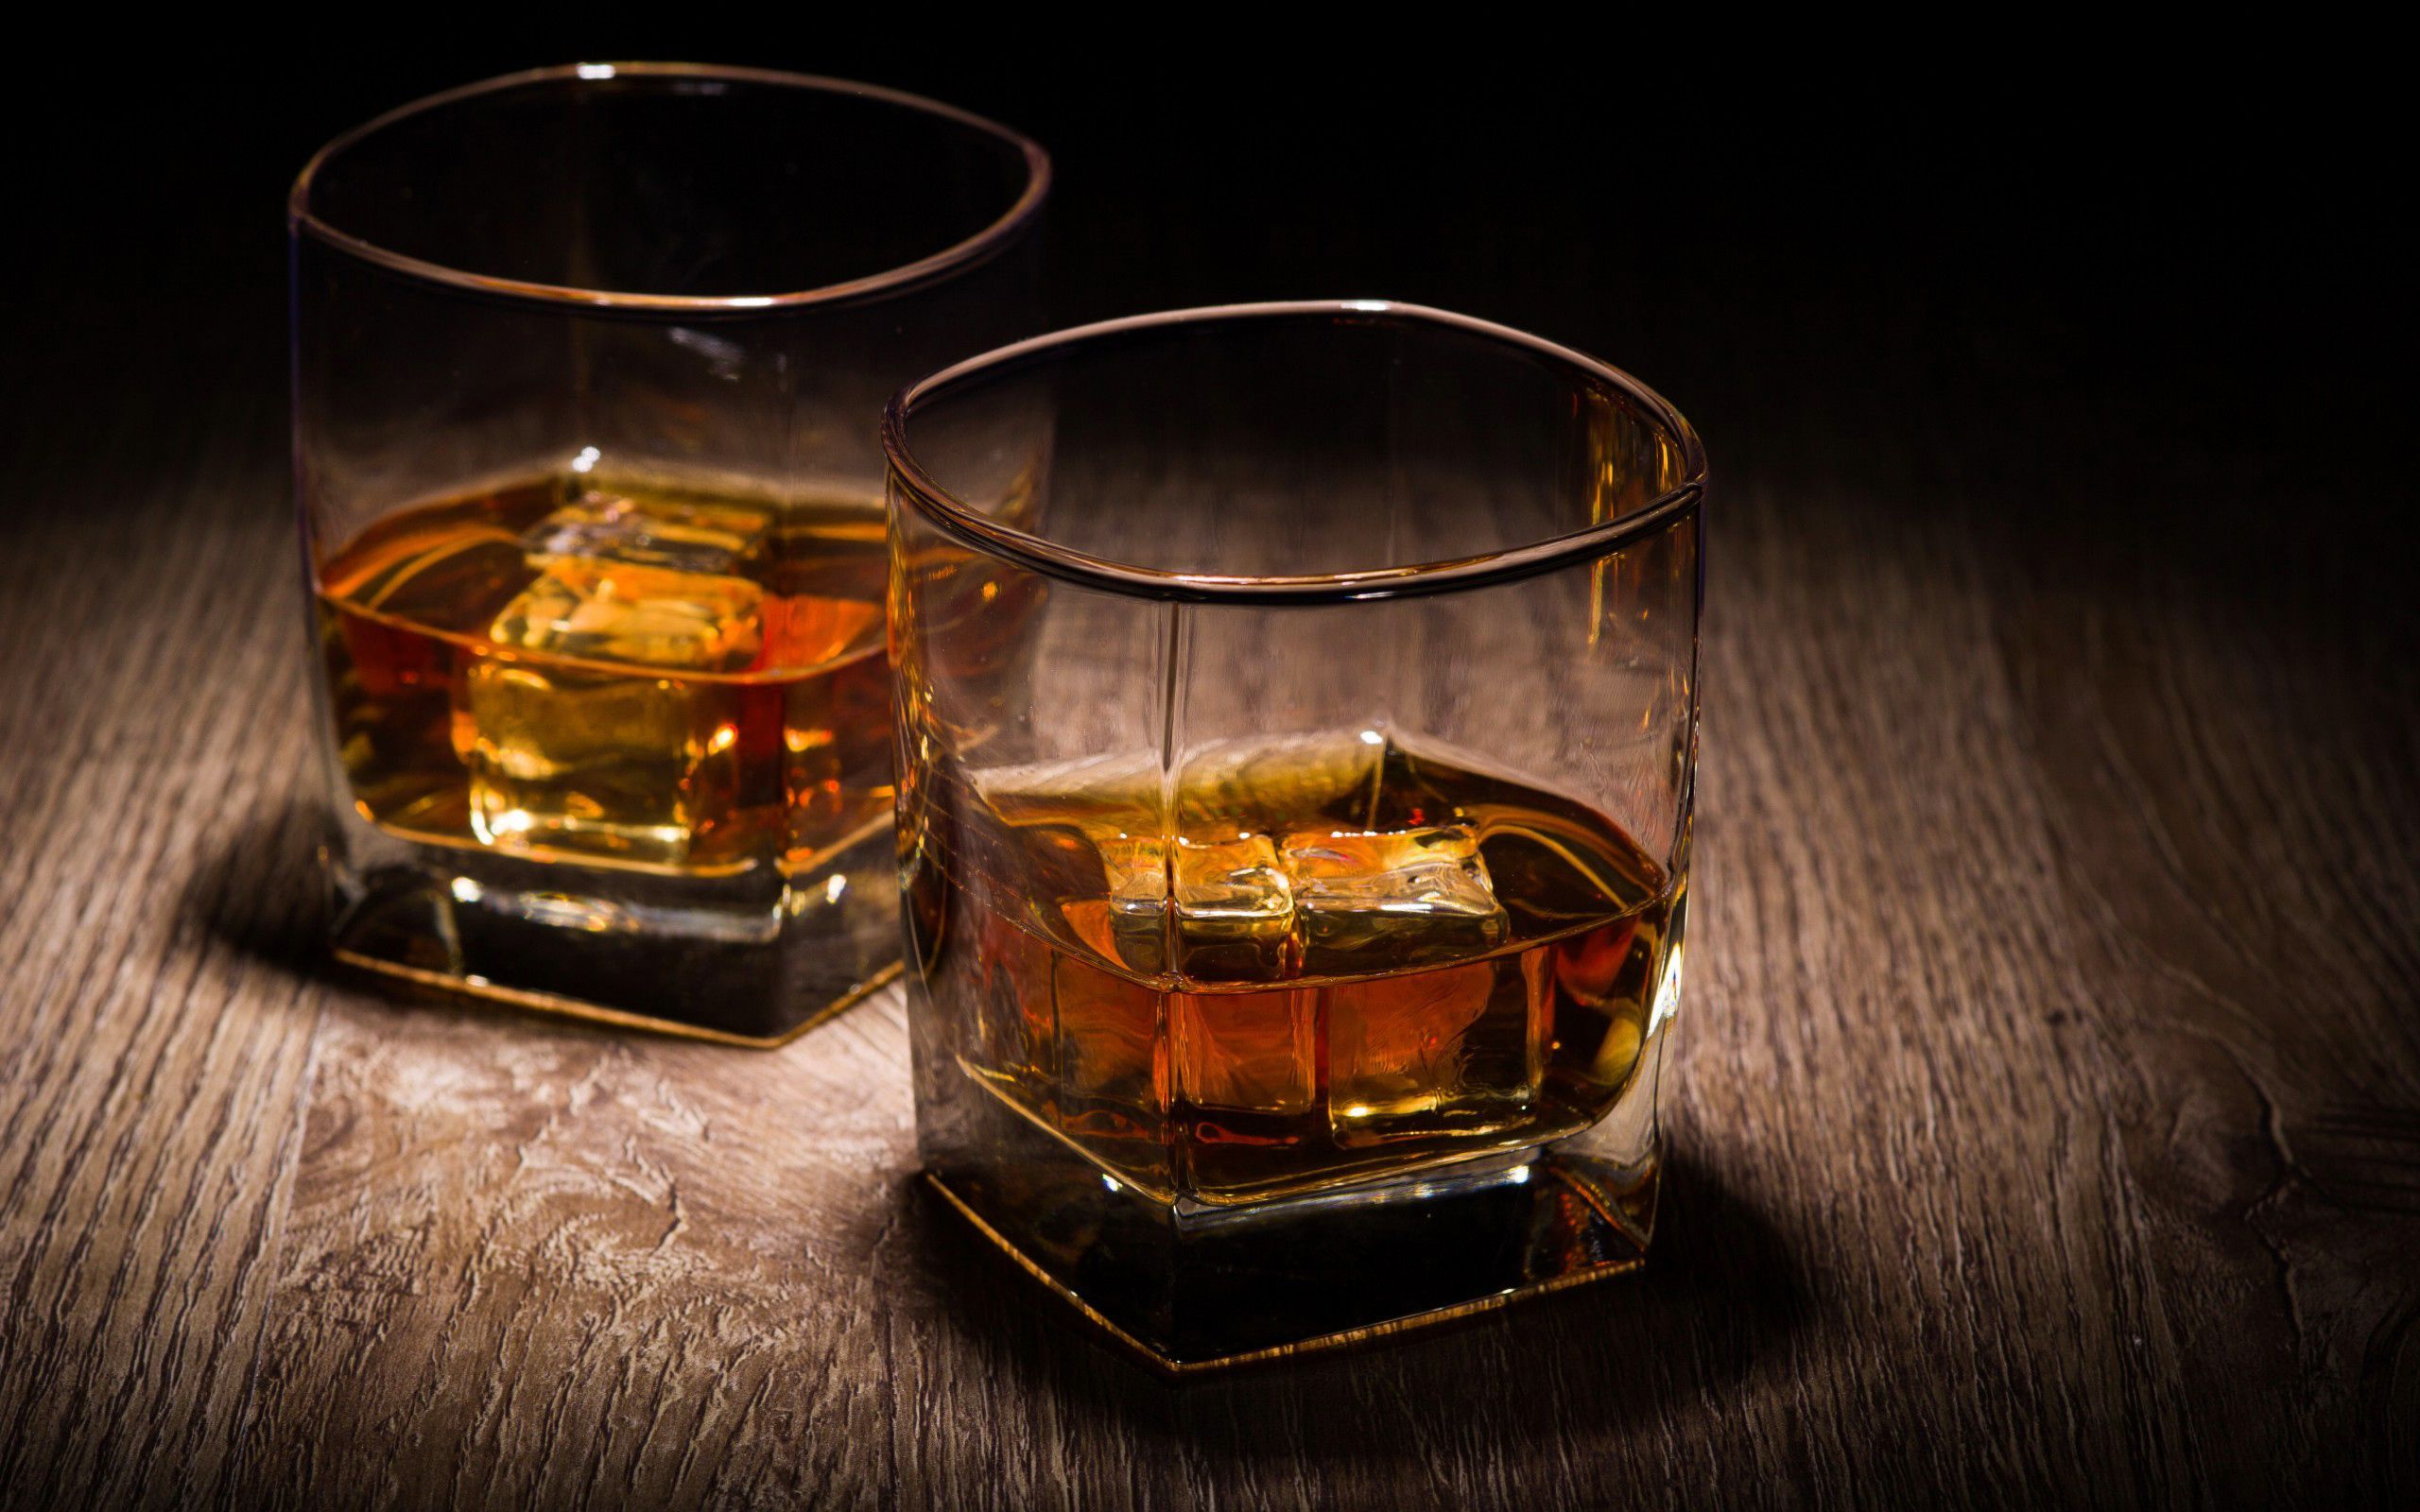 46 Whisky Hd Wallpapers Background Images Wallpaper Abyss - Gambaran